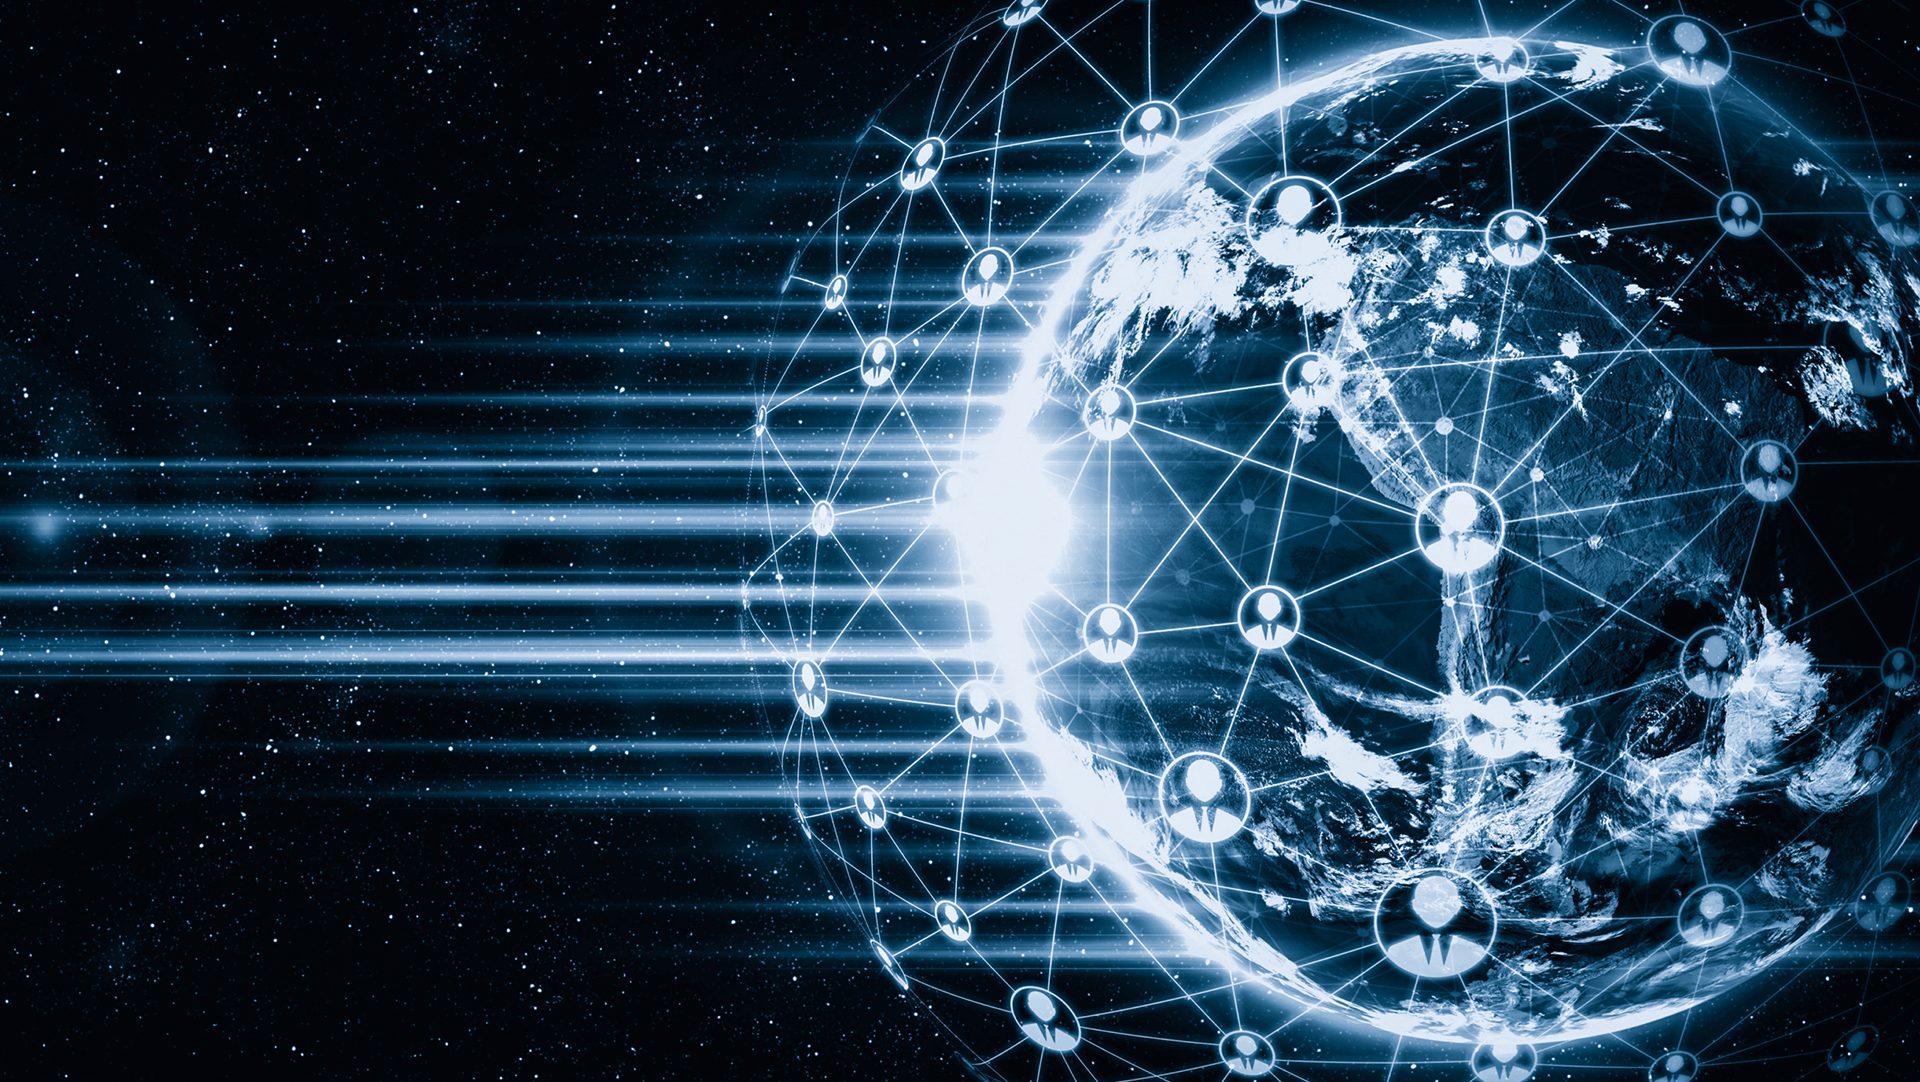 A digital representation of the earth with glowing network connections symbolizing global communication and data exchange on a backdrop of space.